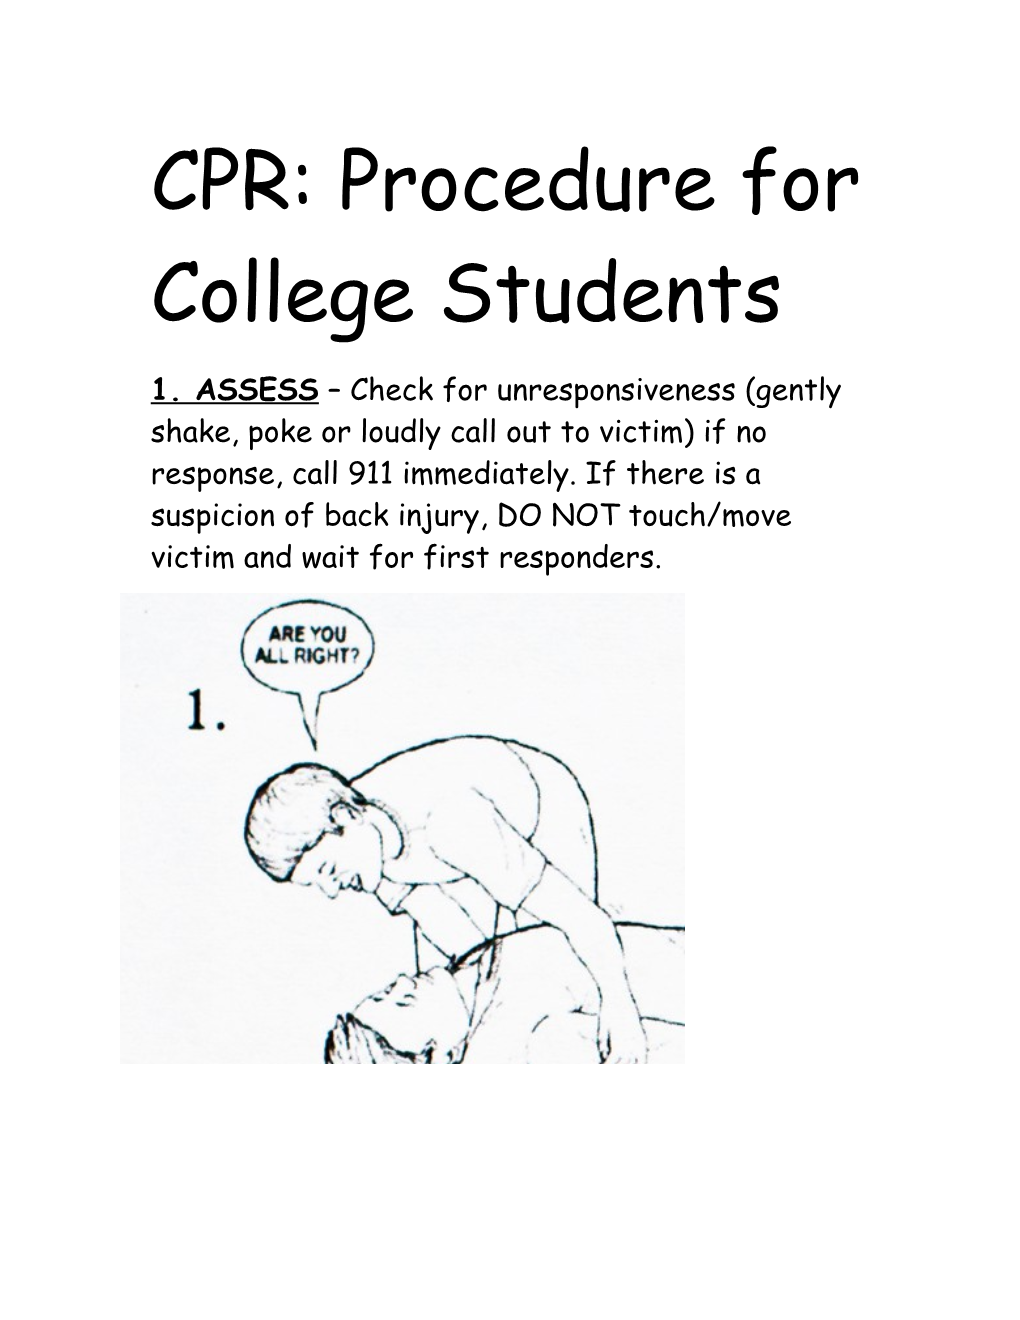 CPR: Procedure for College Students